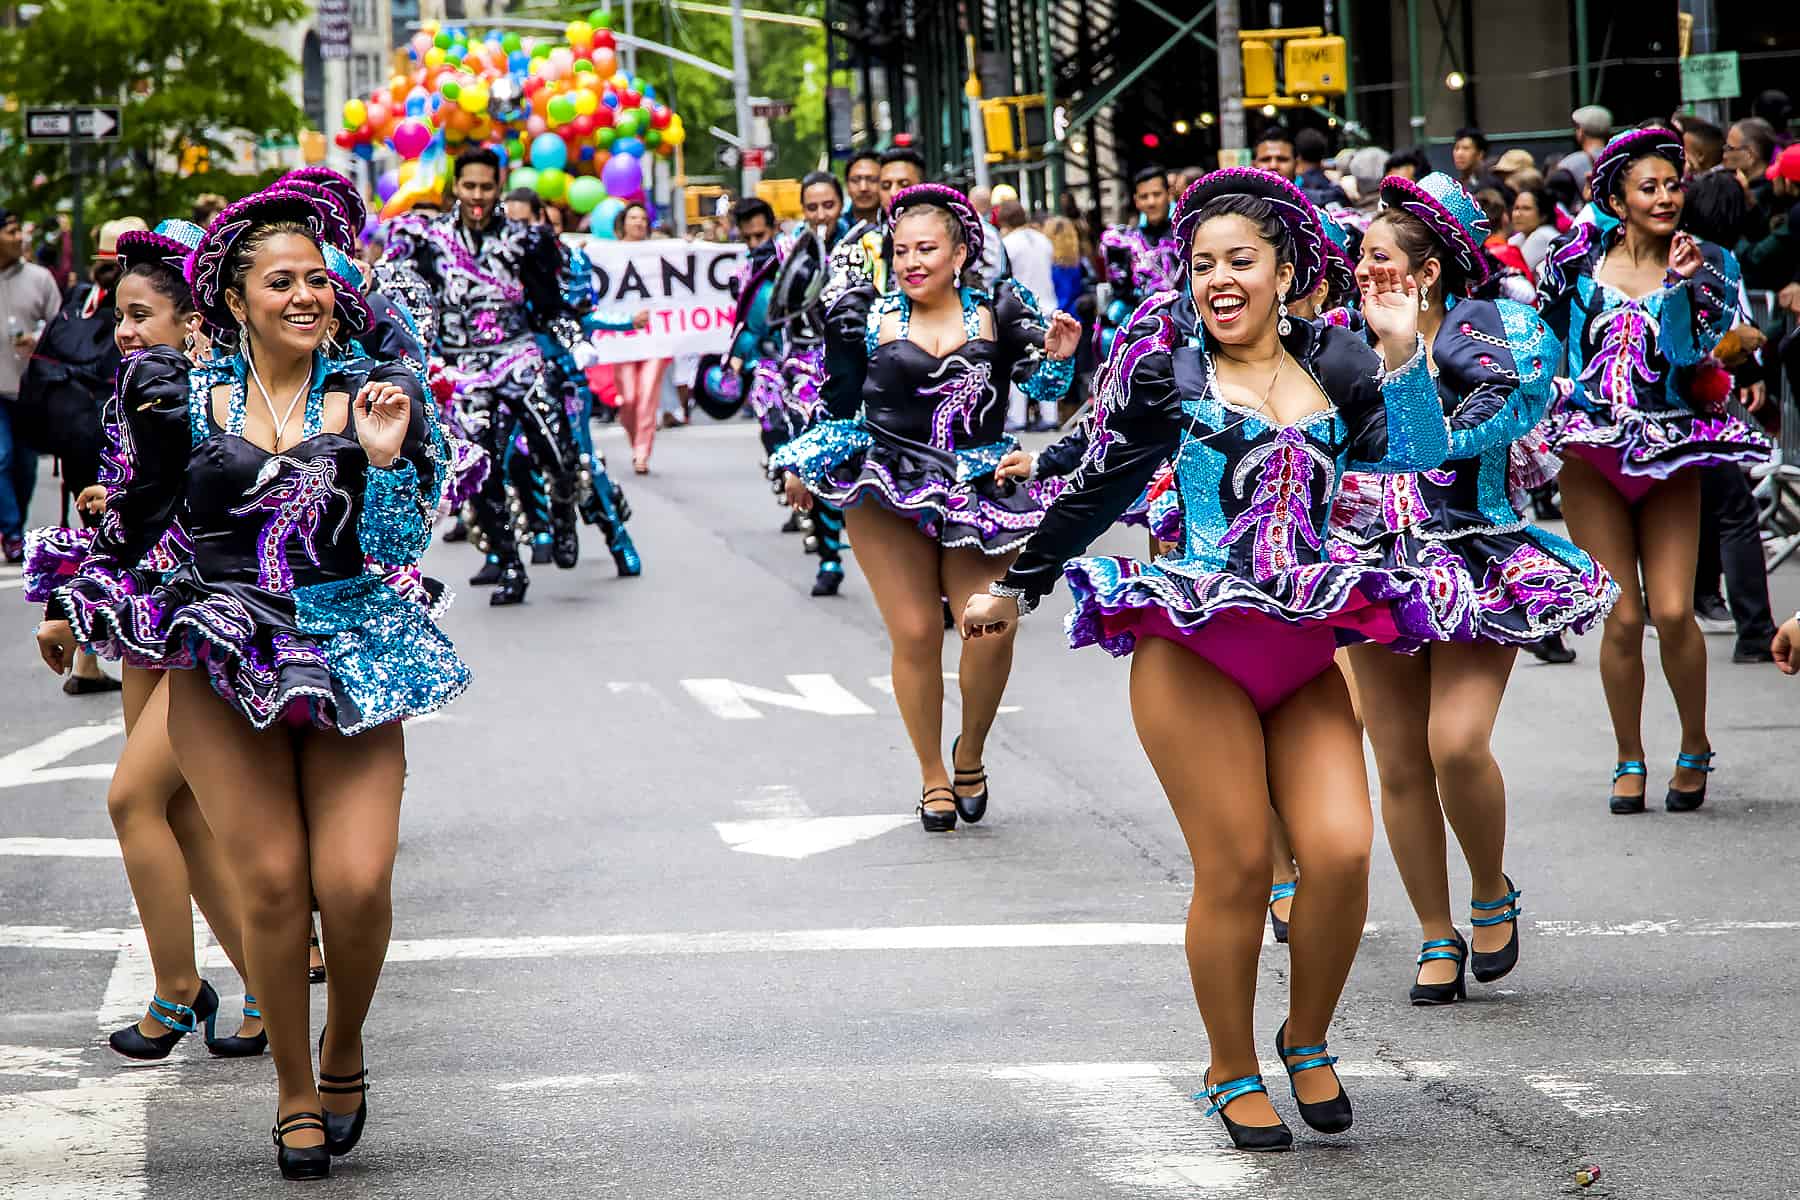 Dance Parade
best things to do in New York City in May